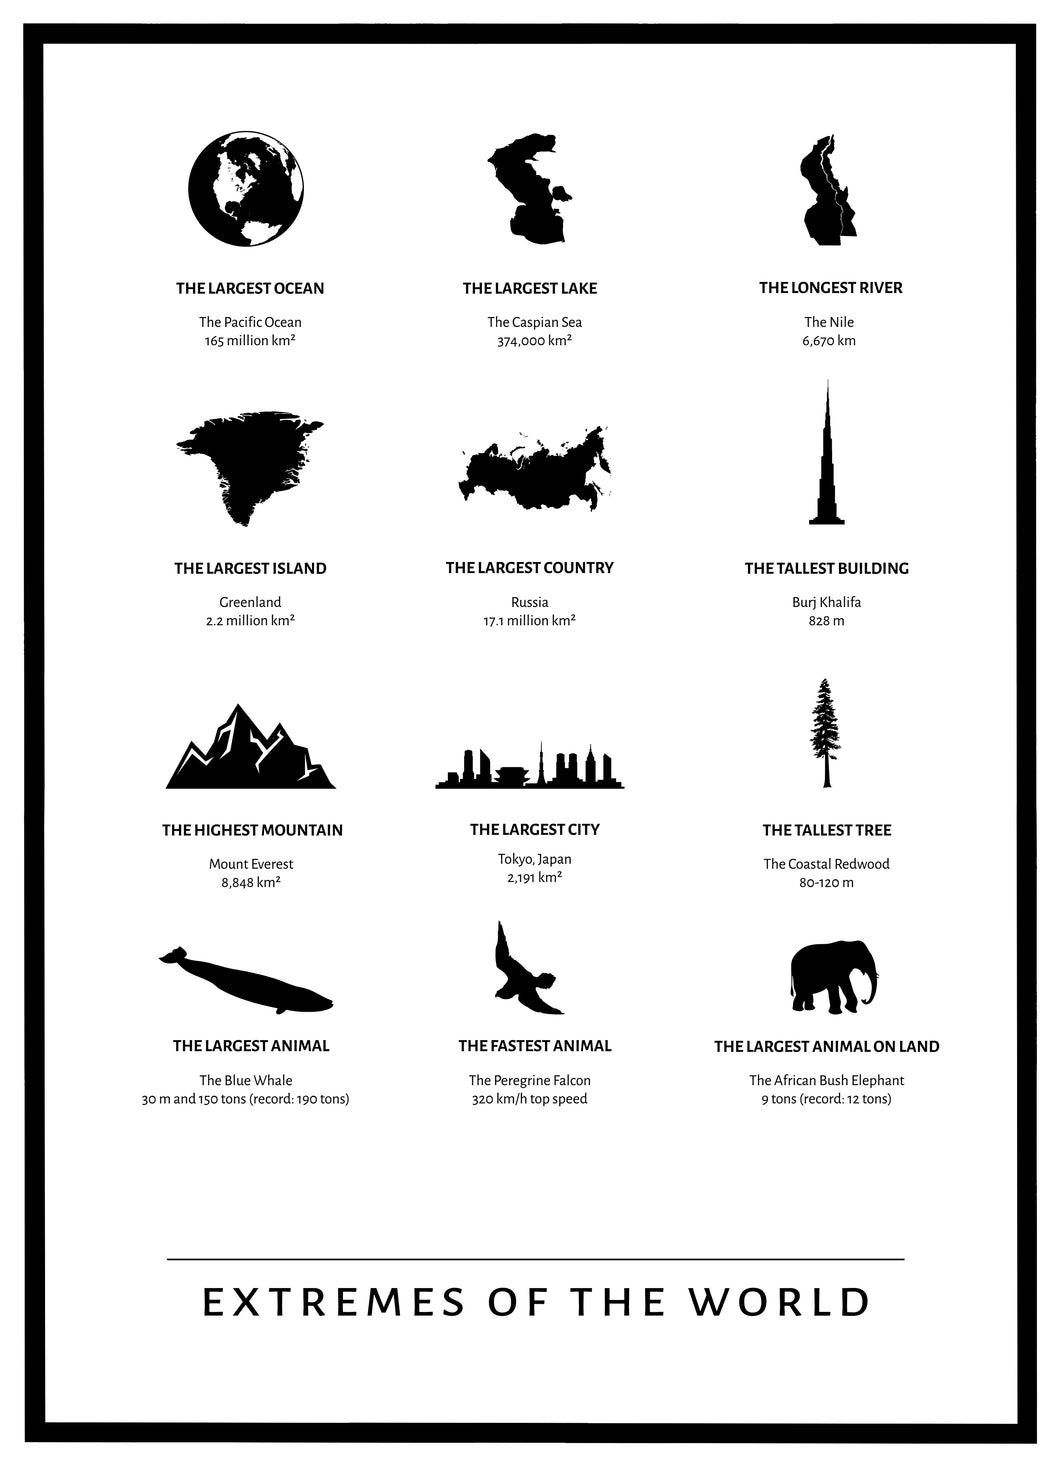 Extremes of the World - Plakat